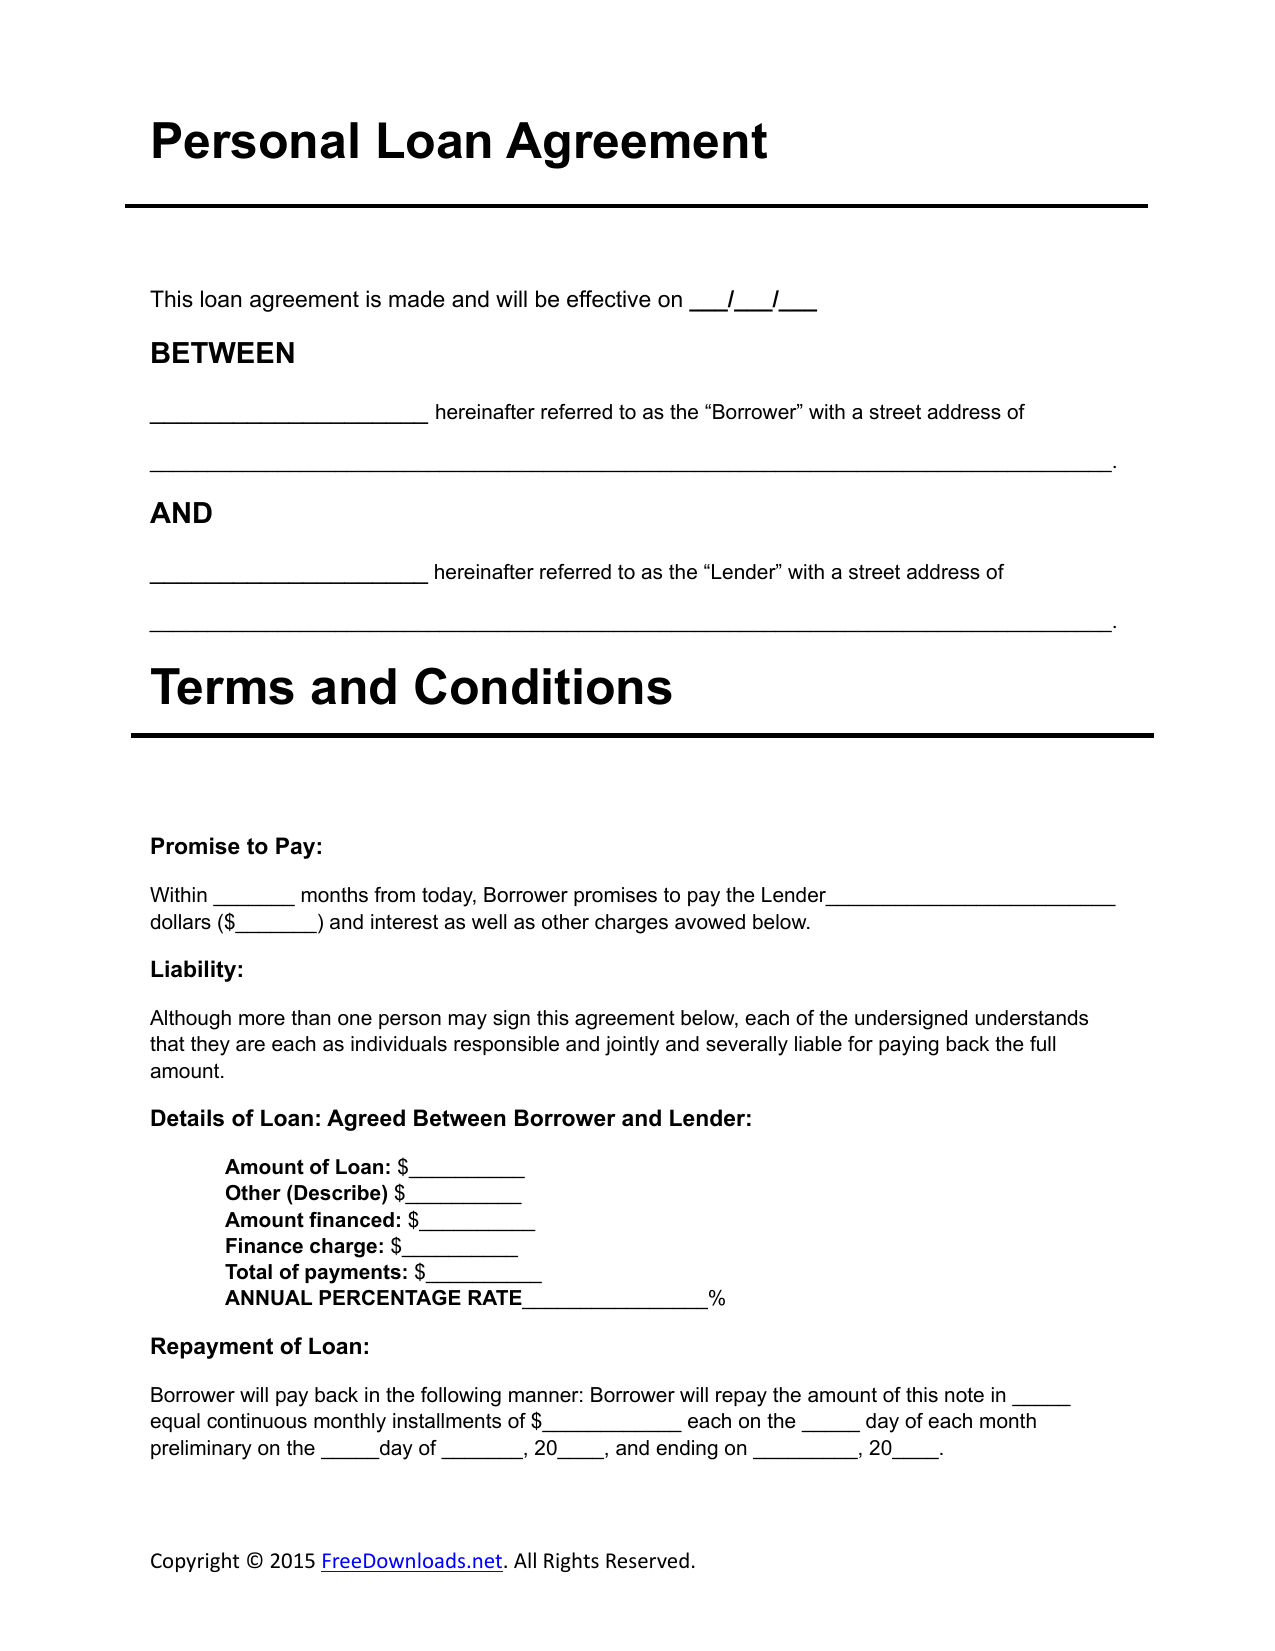 Download Personal Loan Agreement Template | Pdf | Rtf | Word - Free Printable Personal Loan Forms